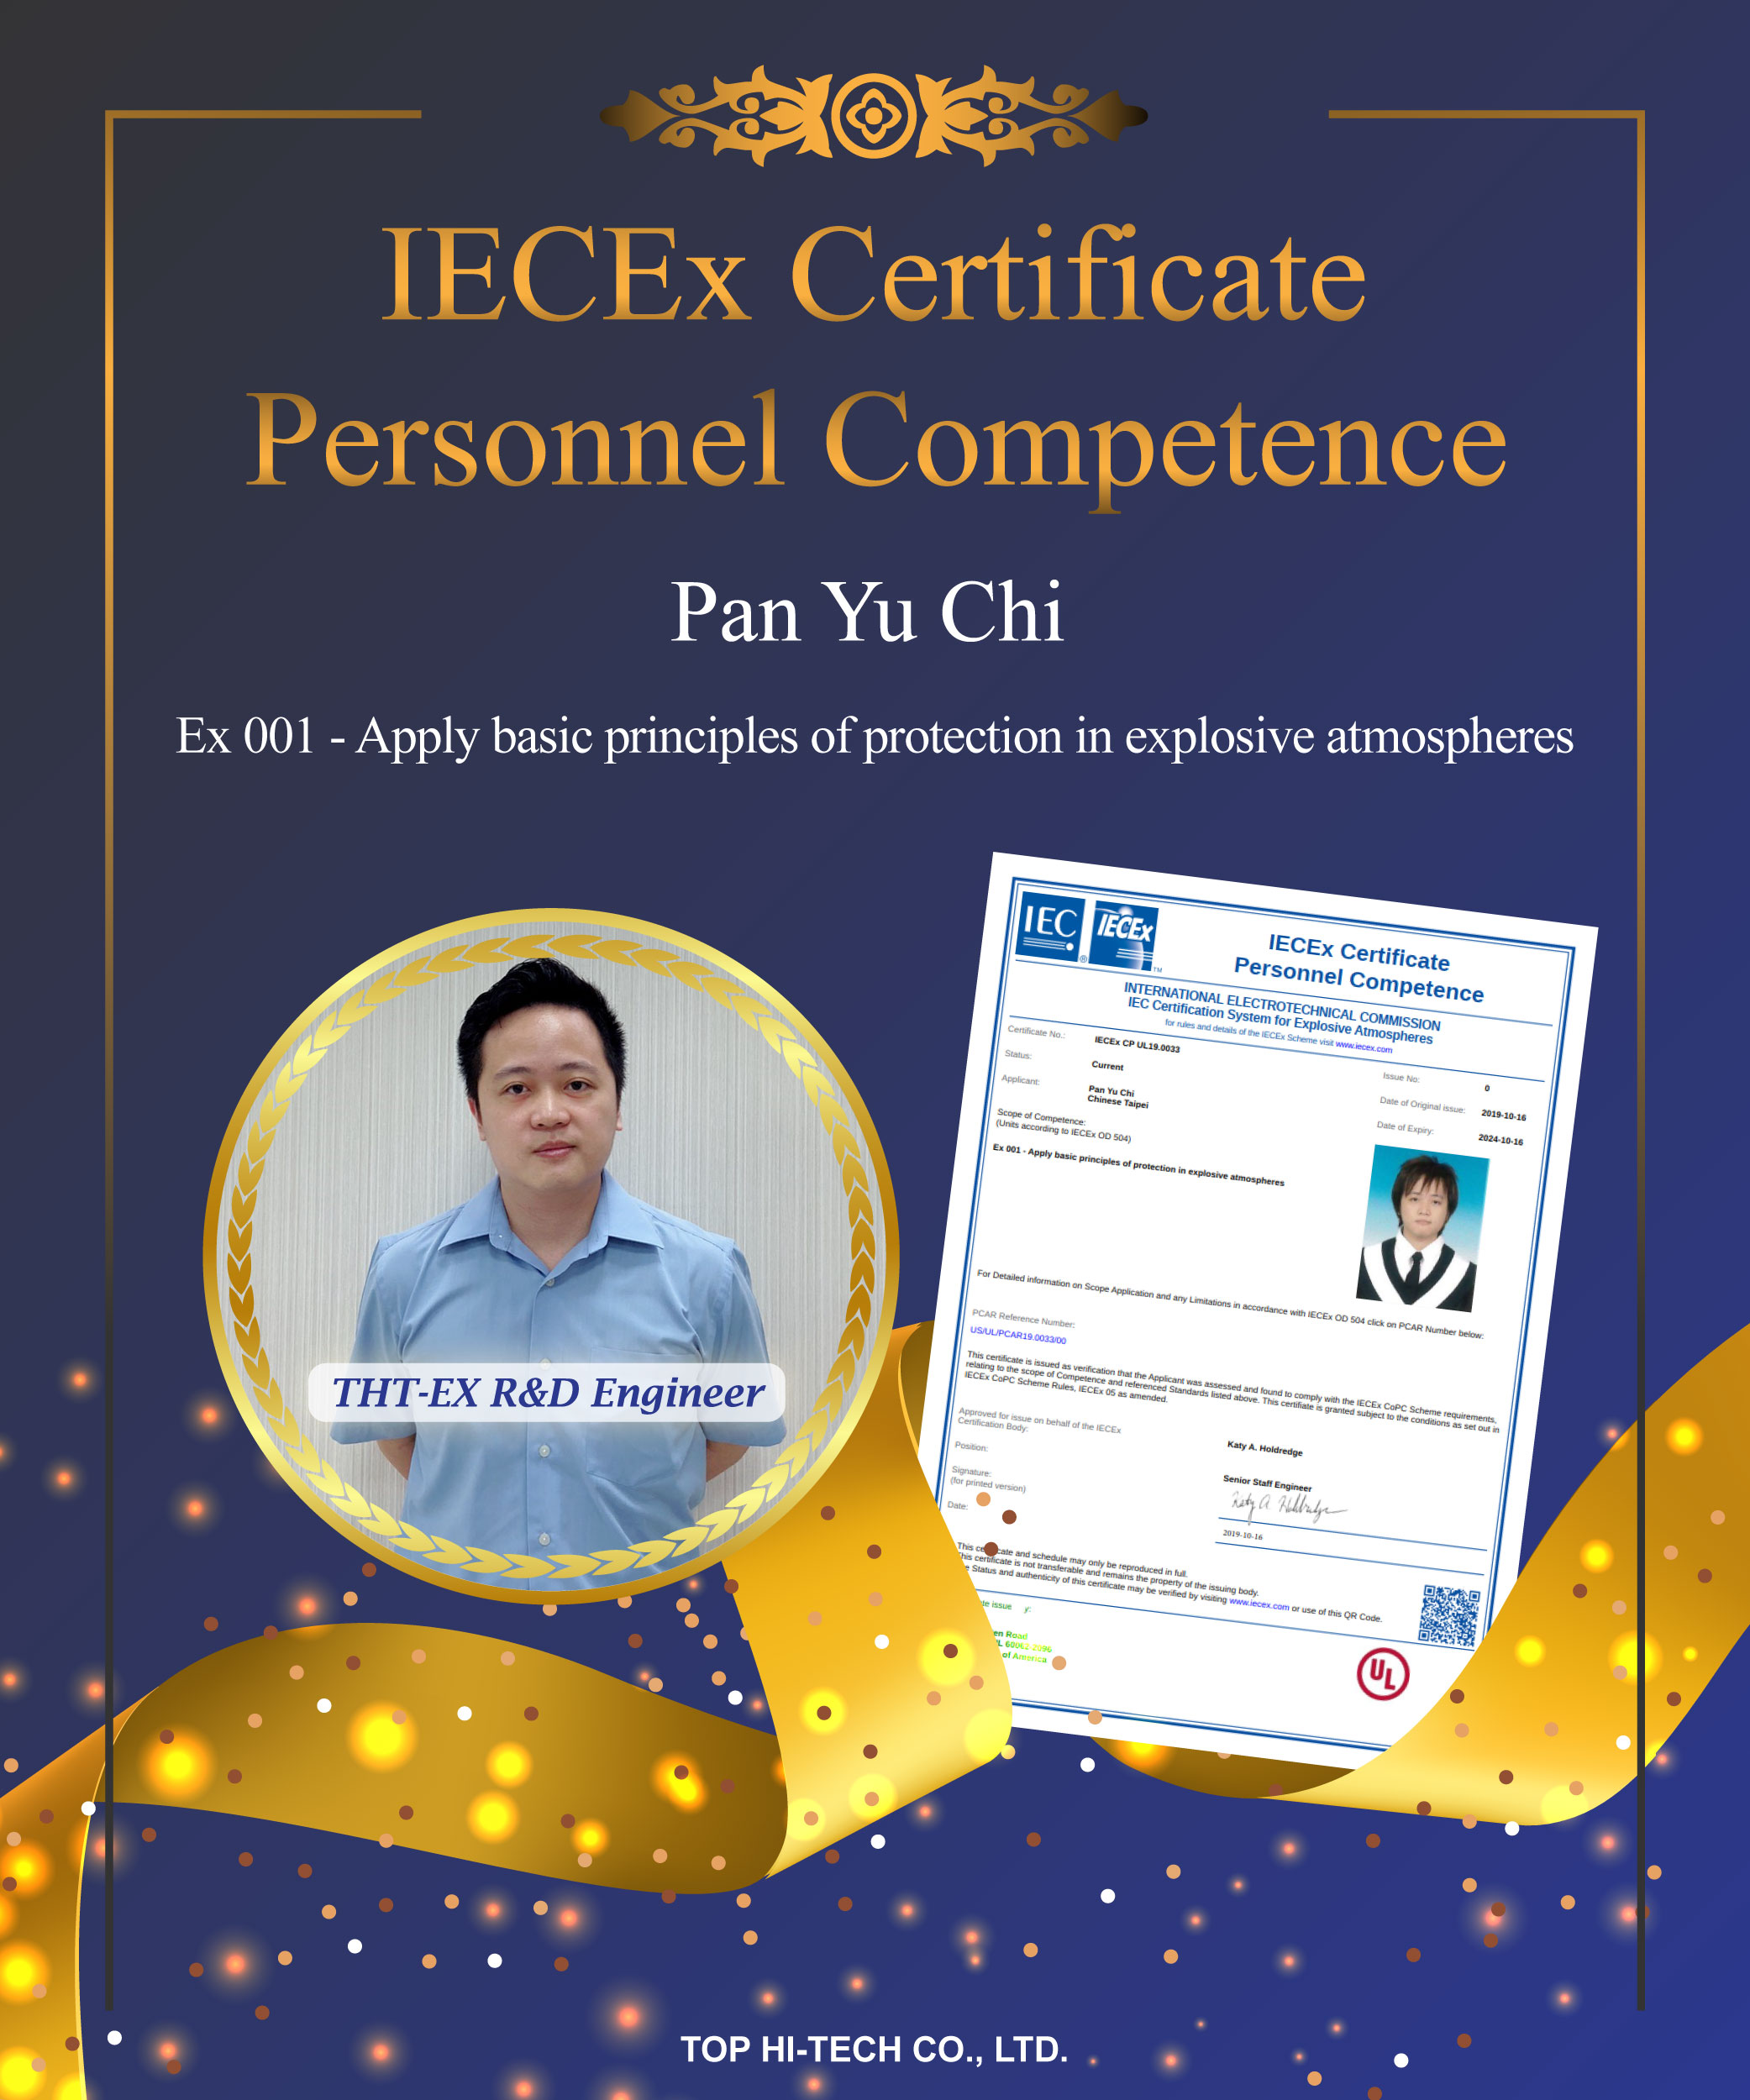 THT-EX has one more engineer received IECEx competence recognition!